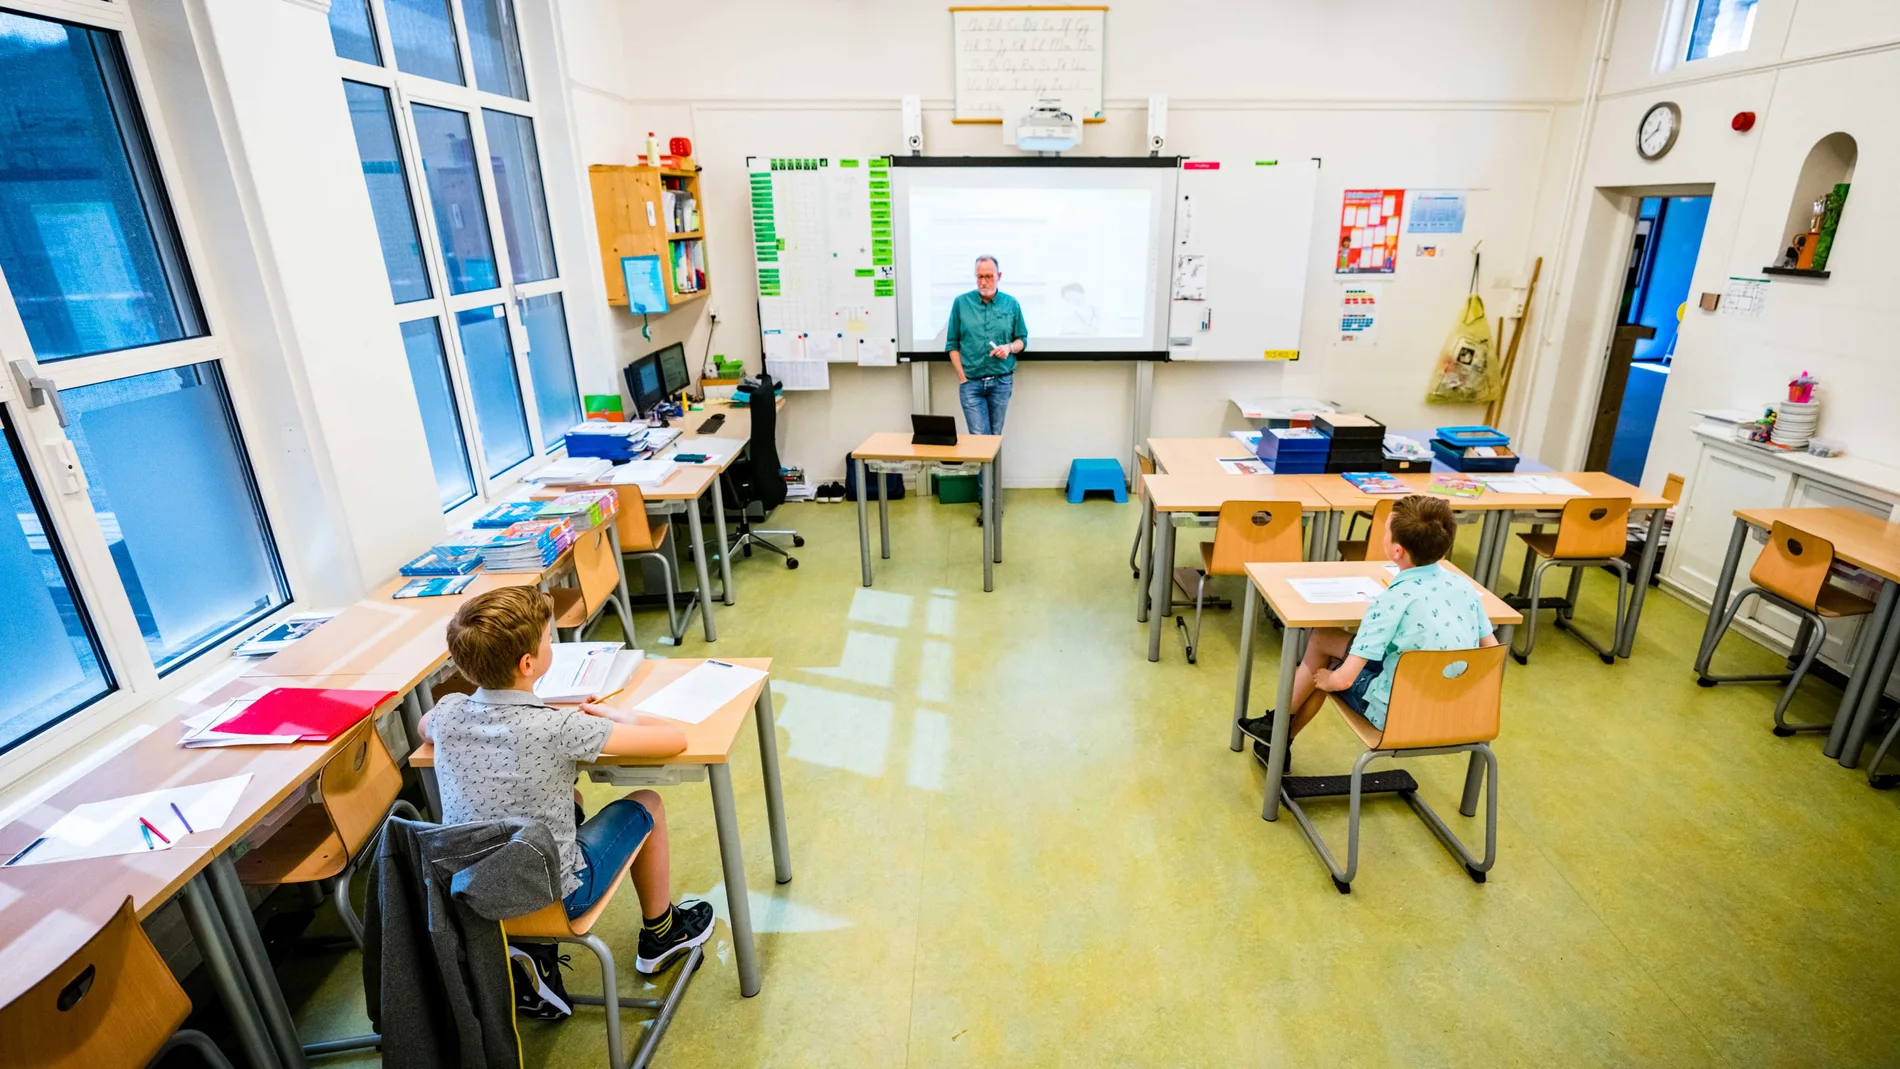 Pupils in Schijndel are taught in small groups during coronavirus pandemic